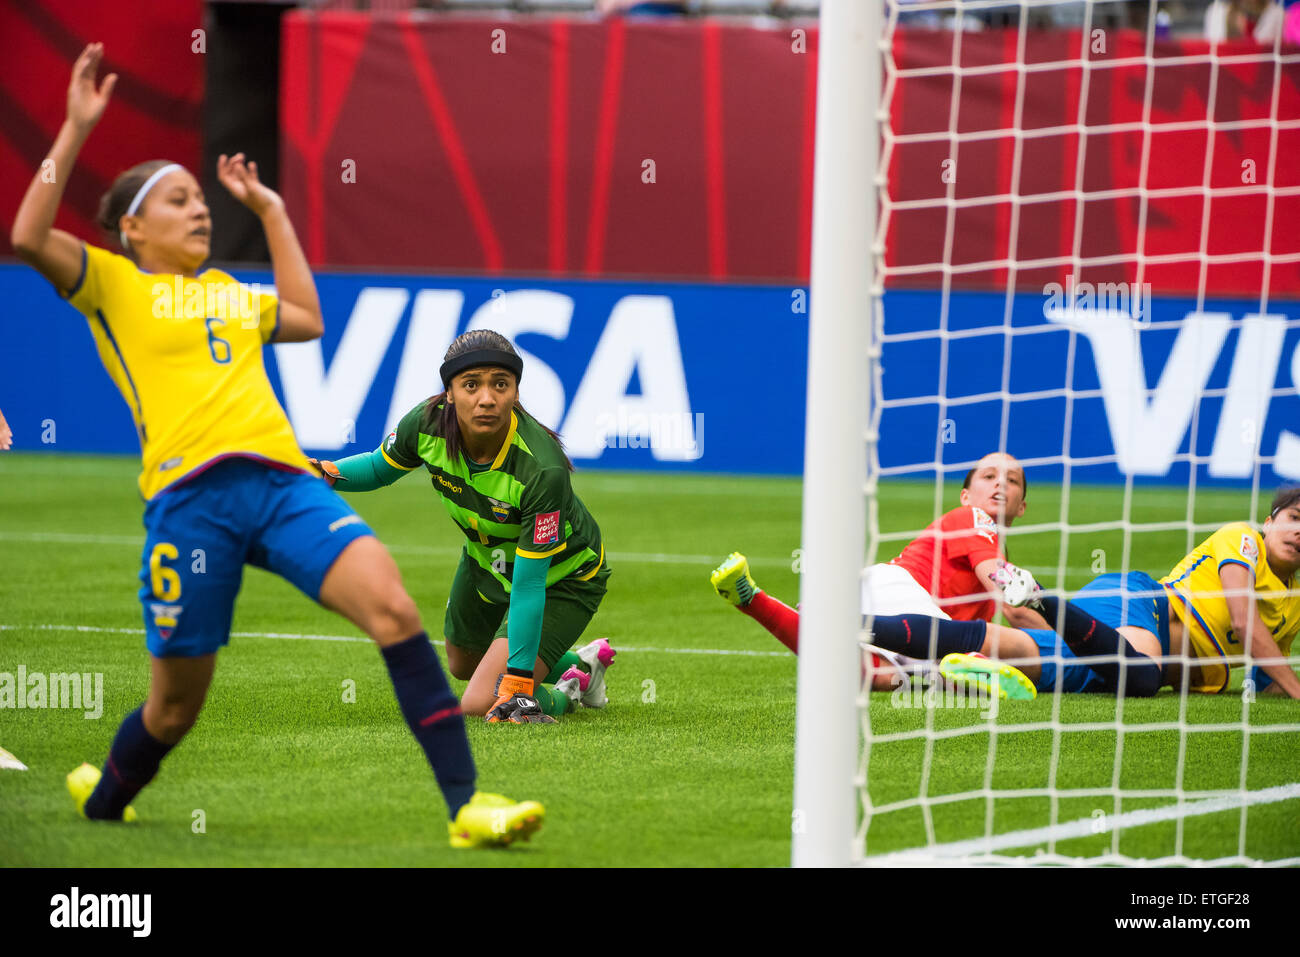 Vancouver, Canada - June 12, 2015: Ecuador goalkeeper Shirley BERRUZ (#1) look on as a Switzerland goal is scored during the opening round match between Switzerland and Ecuador of the FIFA Women's World Cup Canada 2015 at BC Place Stadium. Switzerland won the match 10-1. Stock Photo